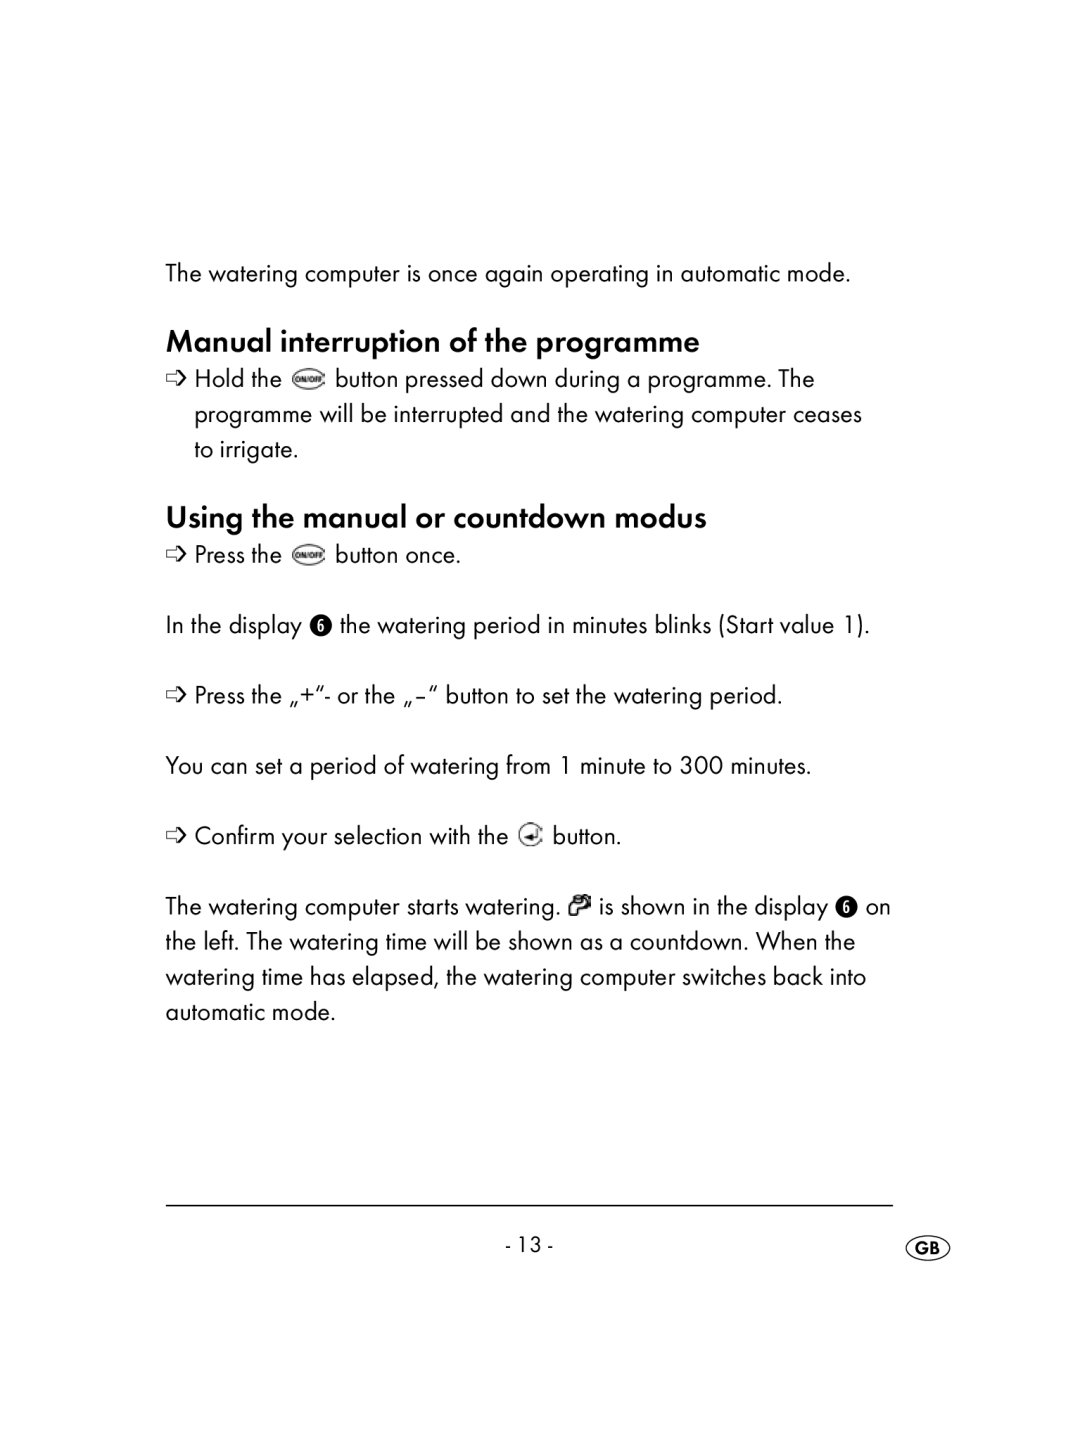 Kompernass KH 4083 Manual interruption of the programme, Using the manual or countdown modus 